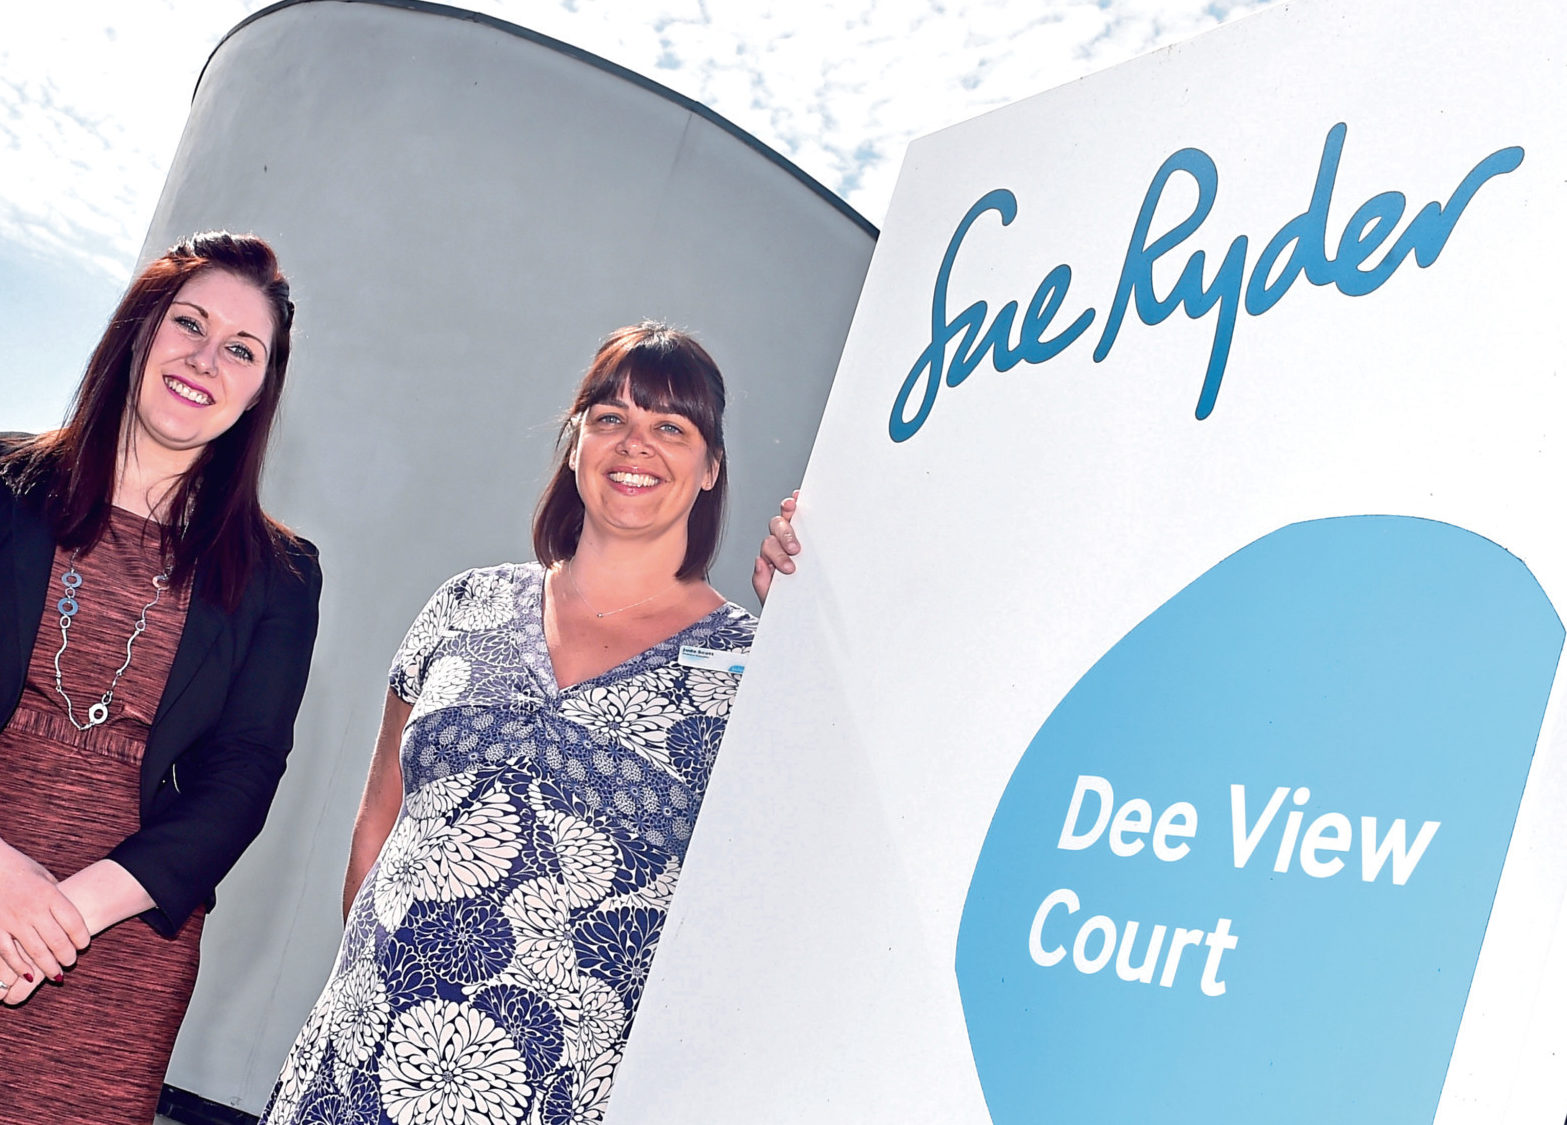 Sue Ryder Dee View Court in Aberdeen is moving forward with its £3.9m expansion.